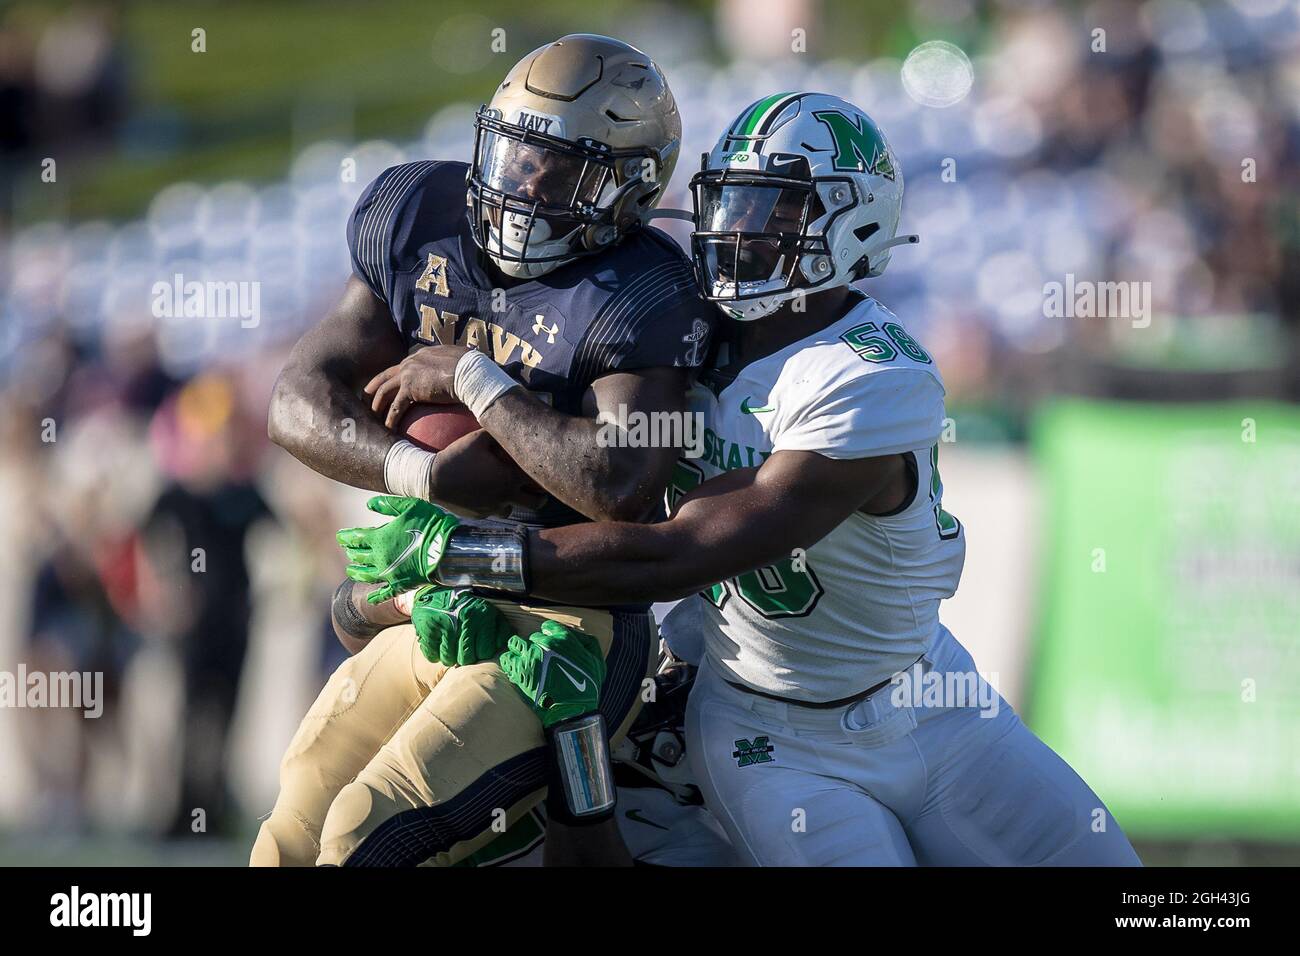 September 4, 2021: Navy Midshipmen fullback James Harris II (37) runs the ball and brought down by a host of Marshall Thundering Herd including Marshall Thundering Herd defensive lineman Elijah Alston (58) during the regular season opening game between the Marshall Thundering Herd and the Navy Midshipmen at Navy-Marine Corps Memorial Stadium in Annapolis, Maryland Photographer: Cory Royster Stock Photo